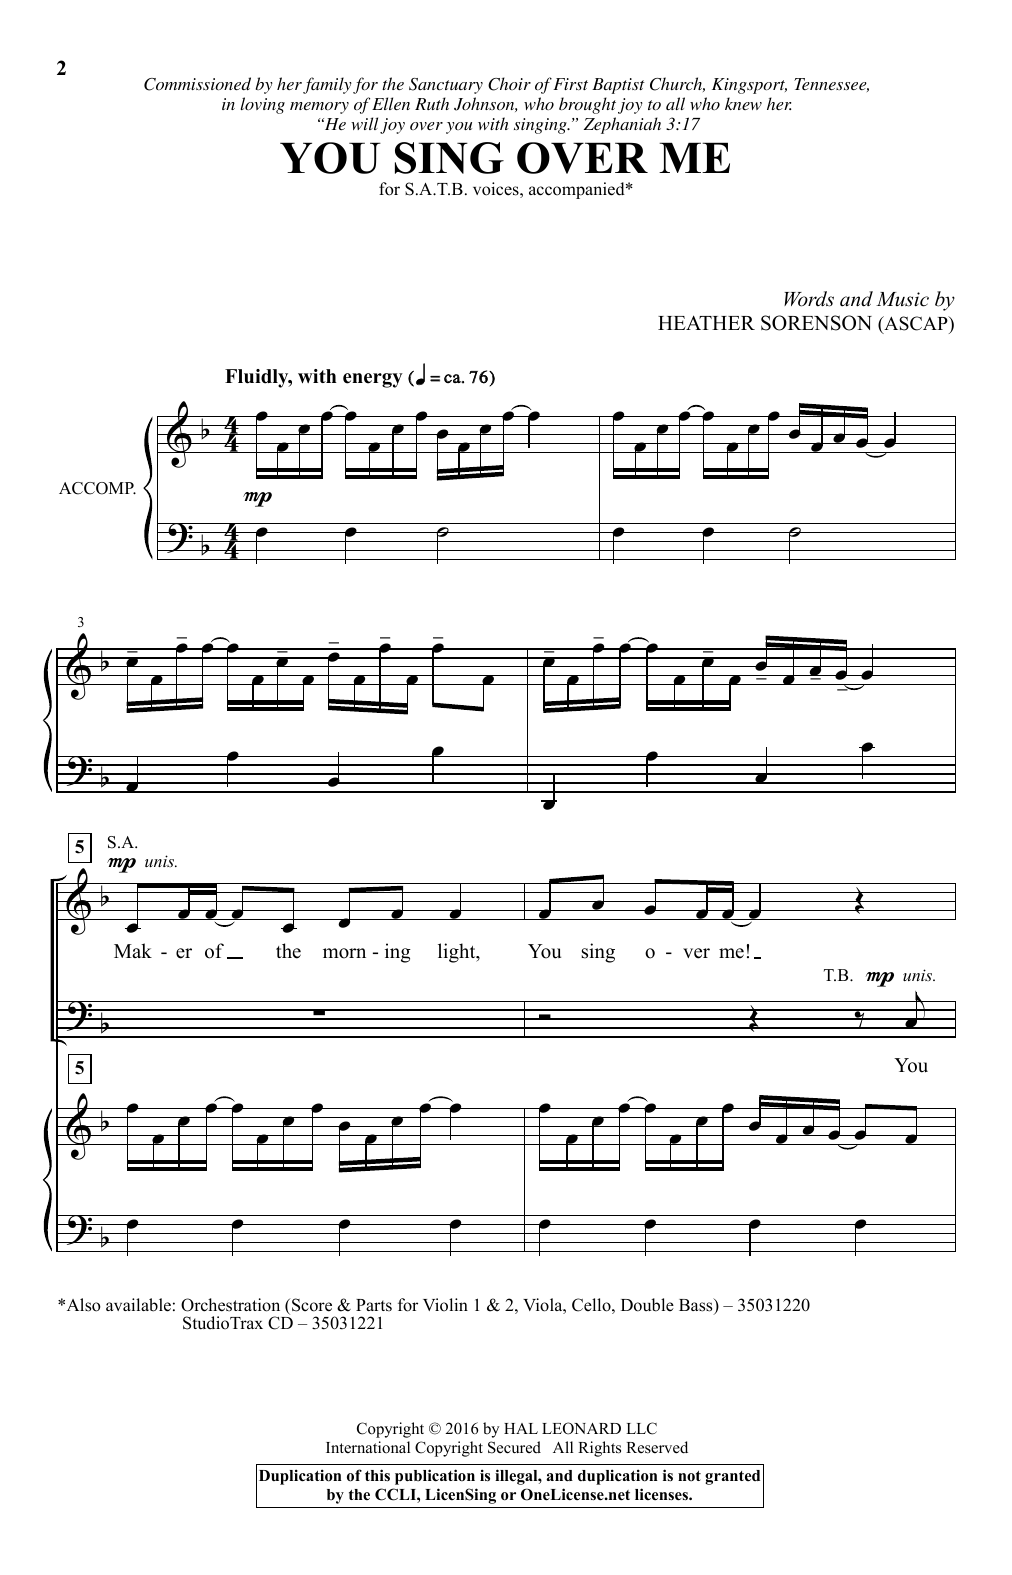 Download Heather Sorenson You Sing Over Me Sheet Music